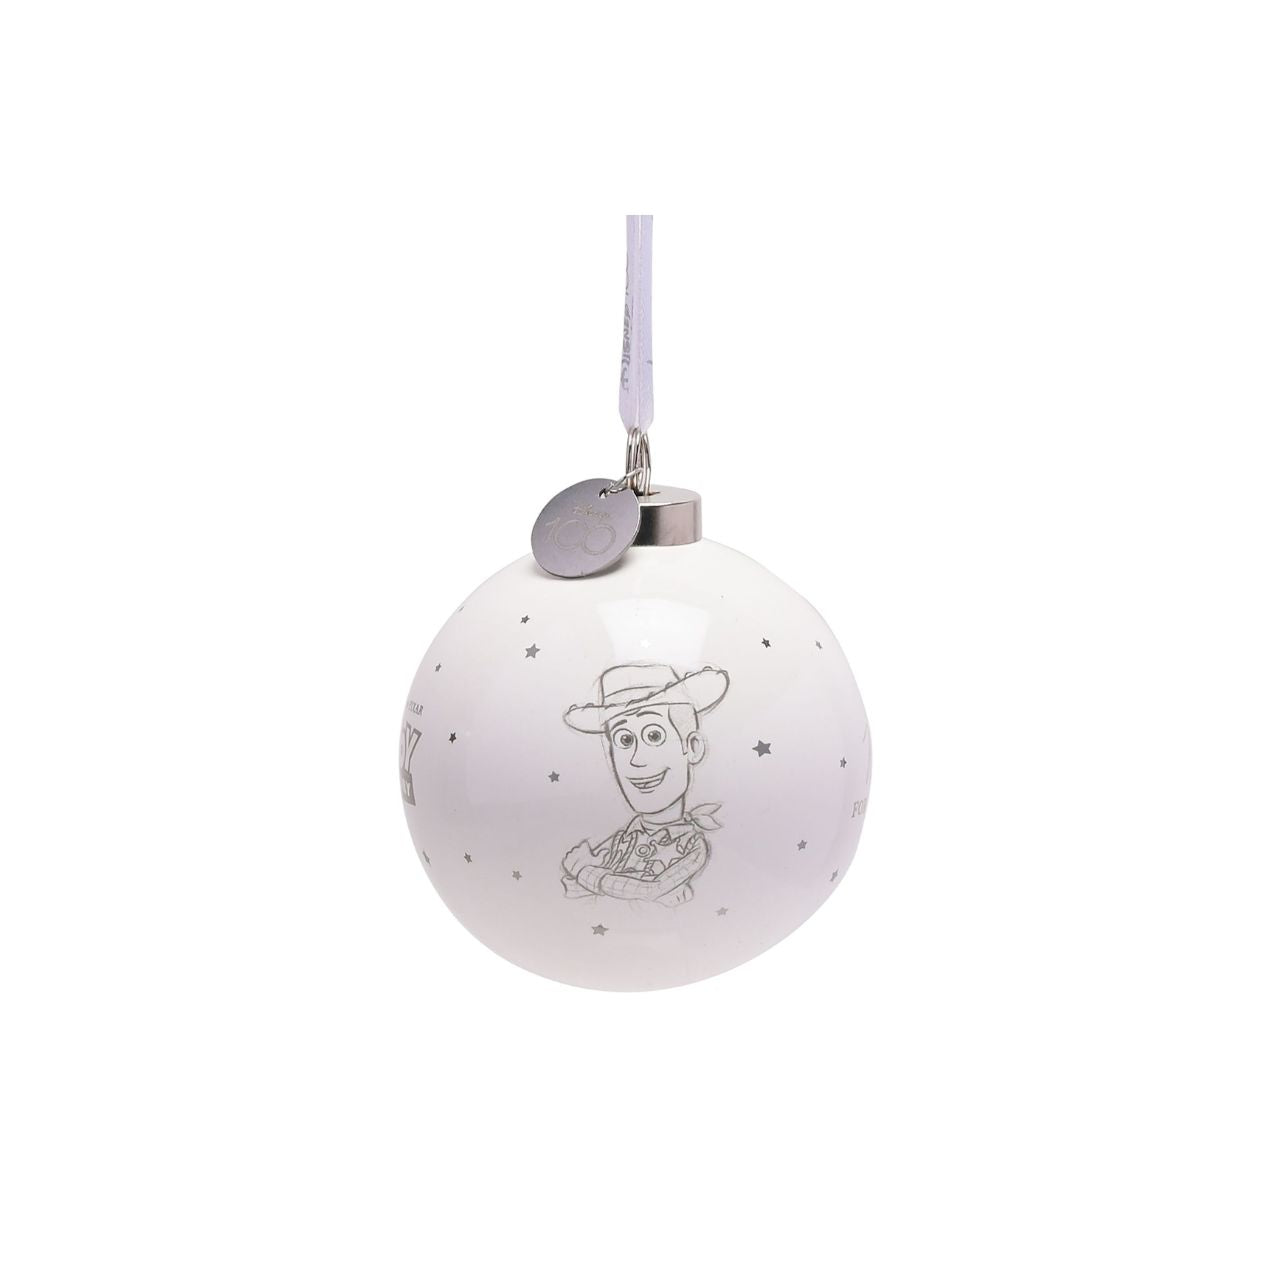 Disney 100th Anniversary Bauble - Woody  A Woody bauble from Disney 100 by DISNEY.  This limited edition tree decoration captures the true magic of Disney on its centenary and can be enjoyed by fans of all ages at Christmas.